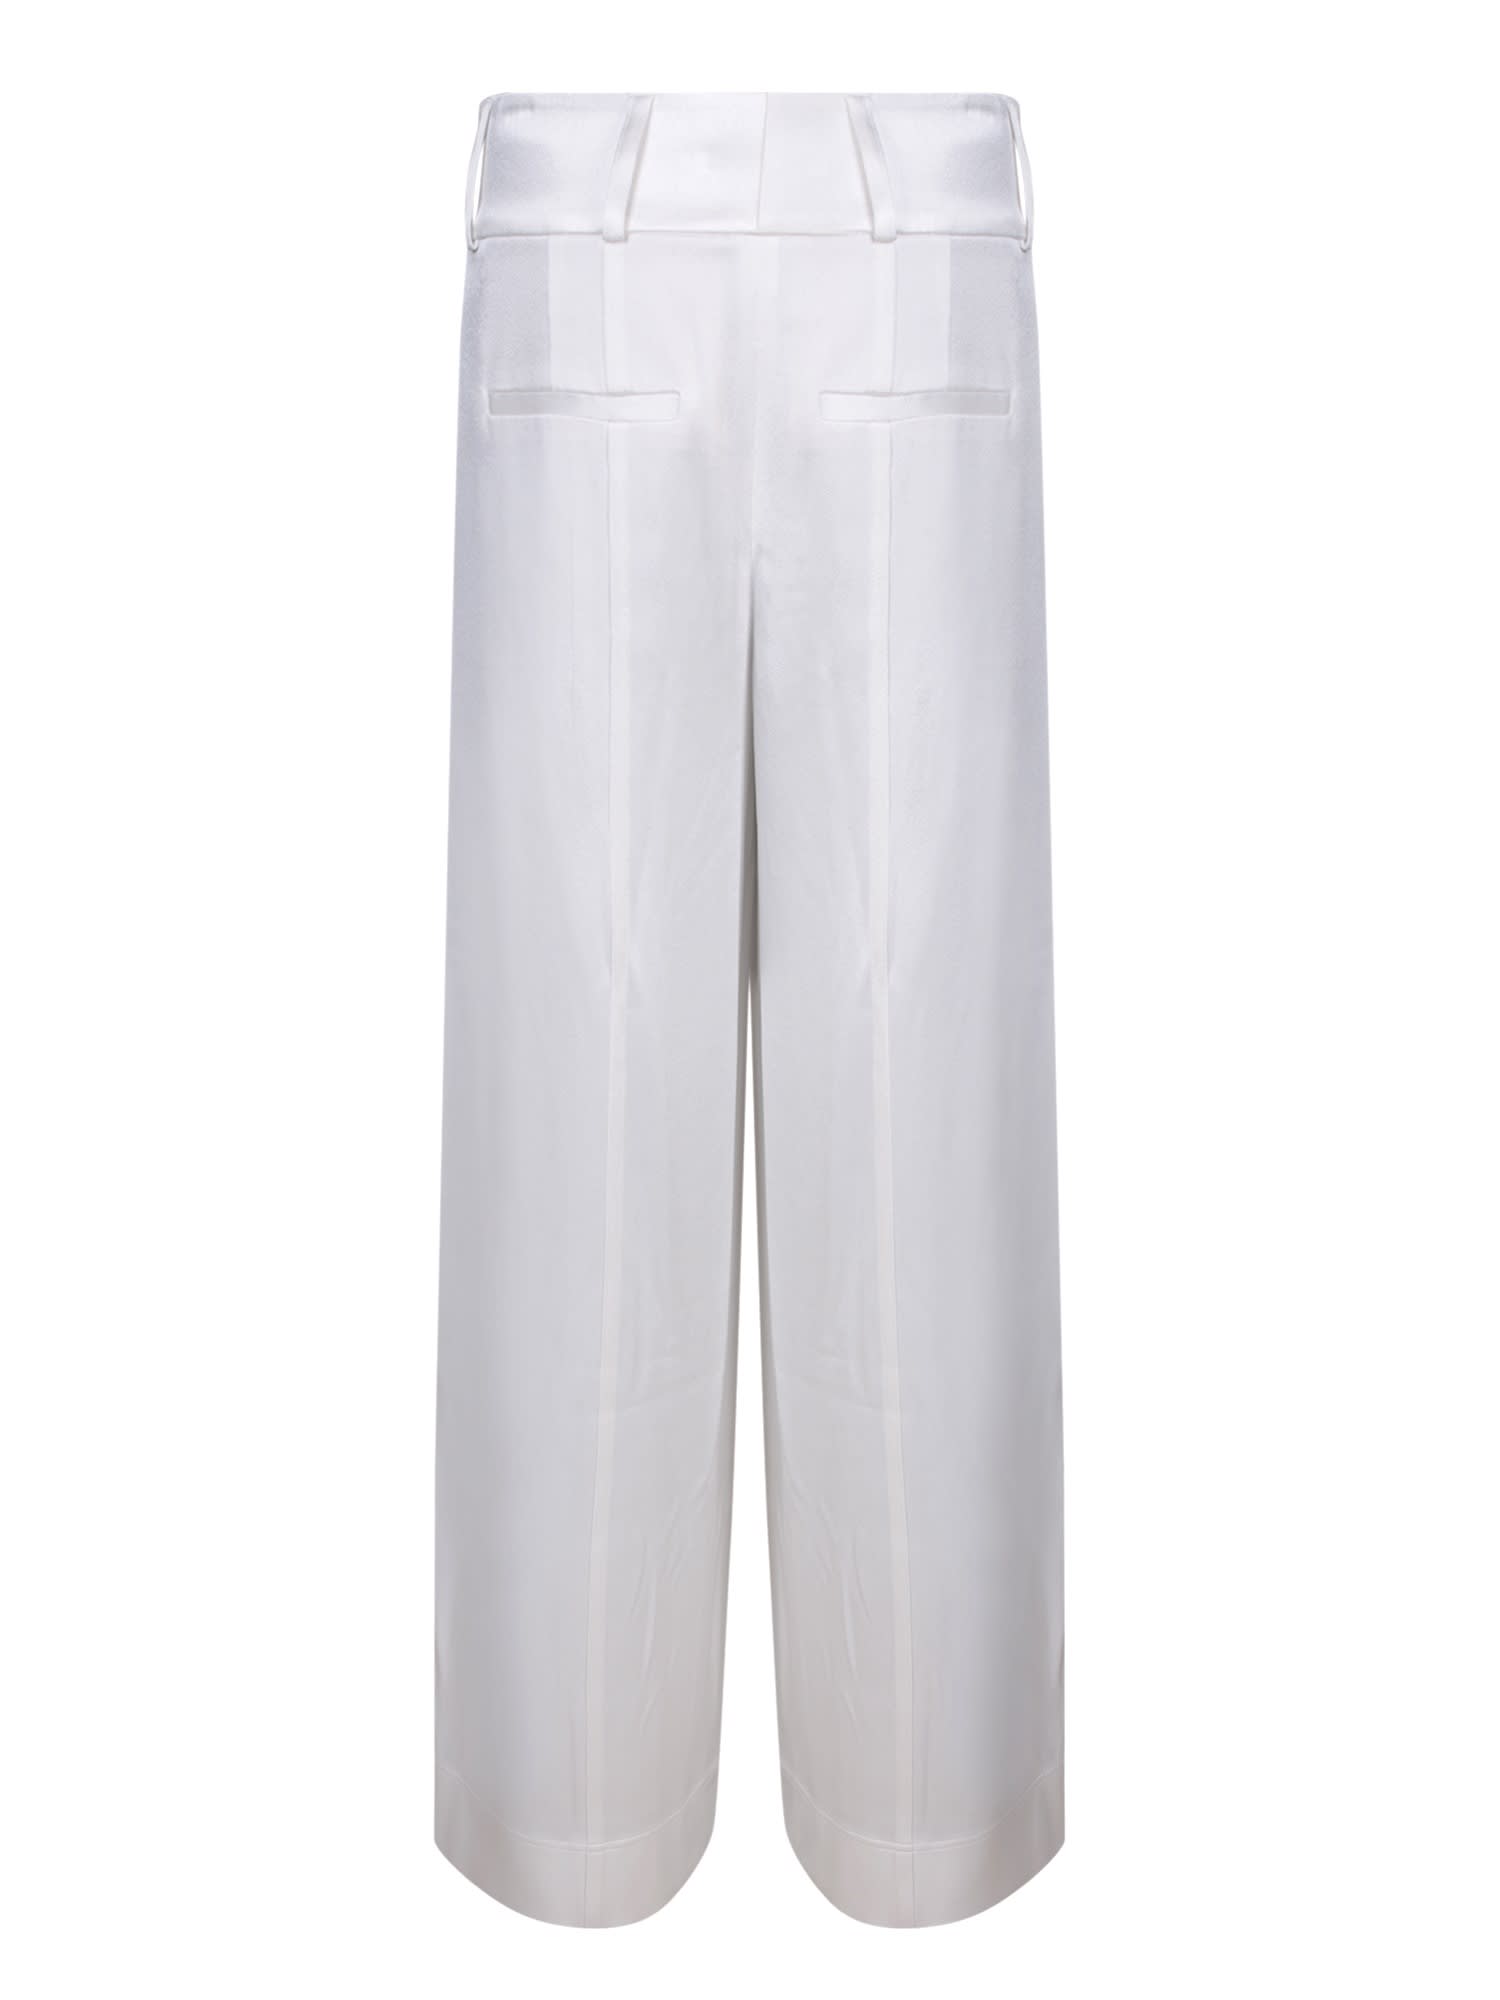 Shop Alice And Olivia White Wide Leg Satin Trousers By Alice + Olivia